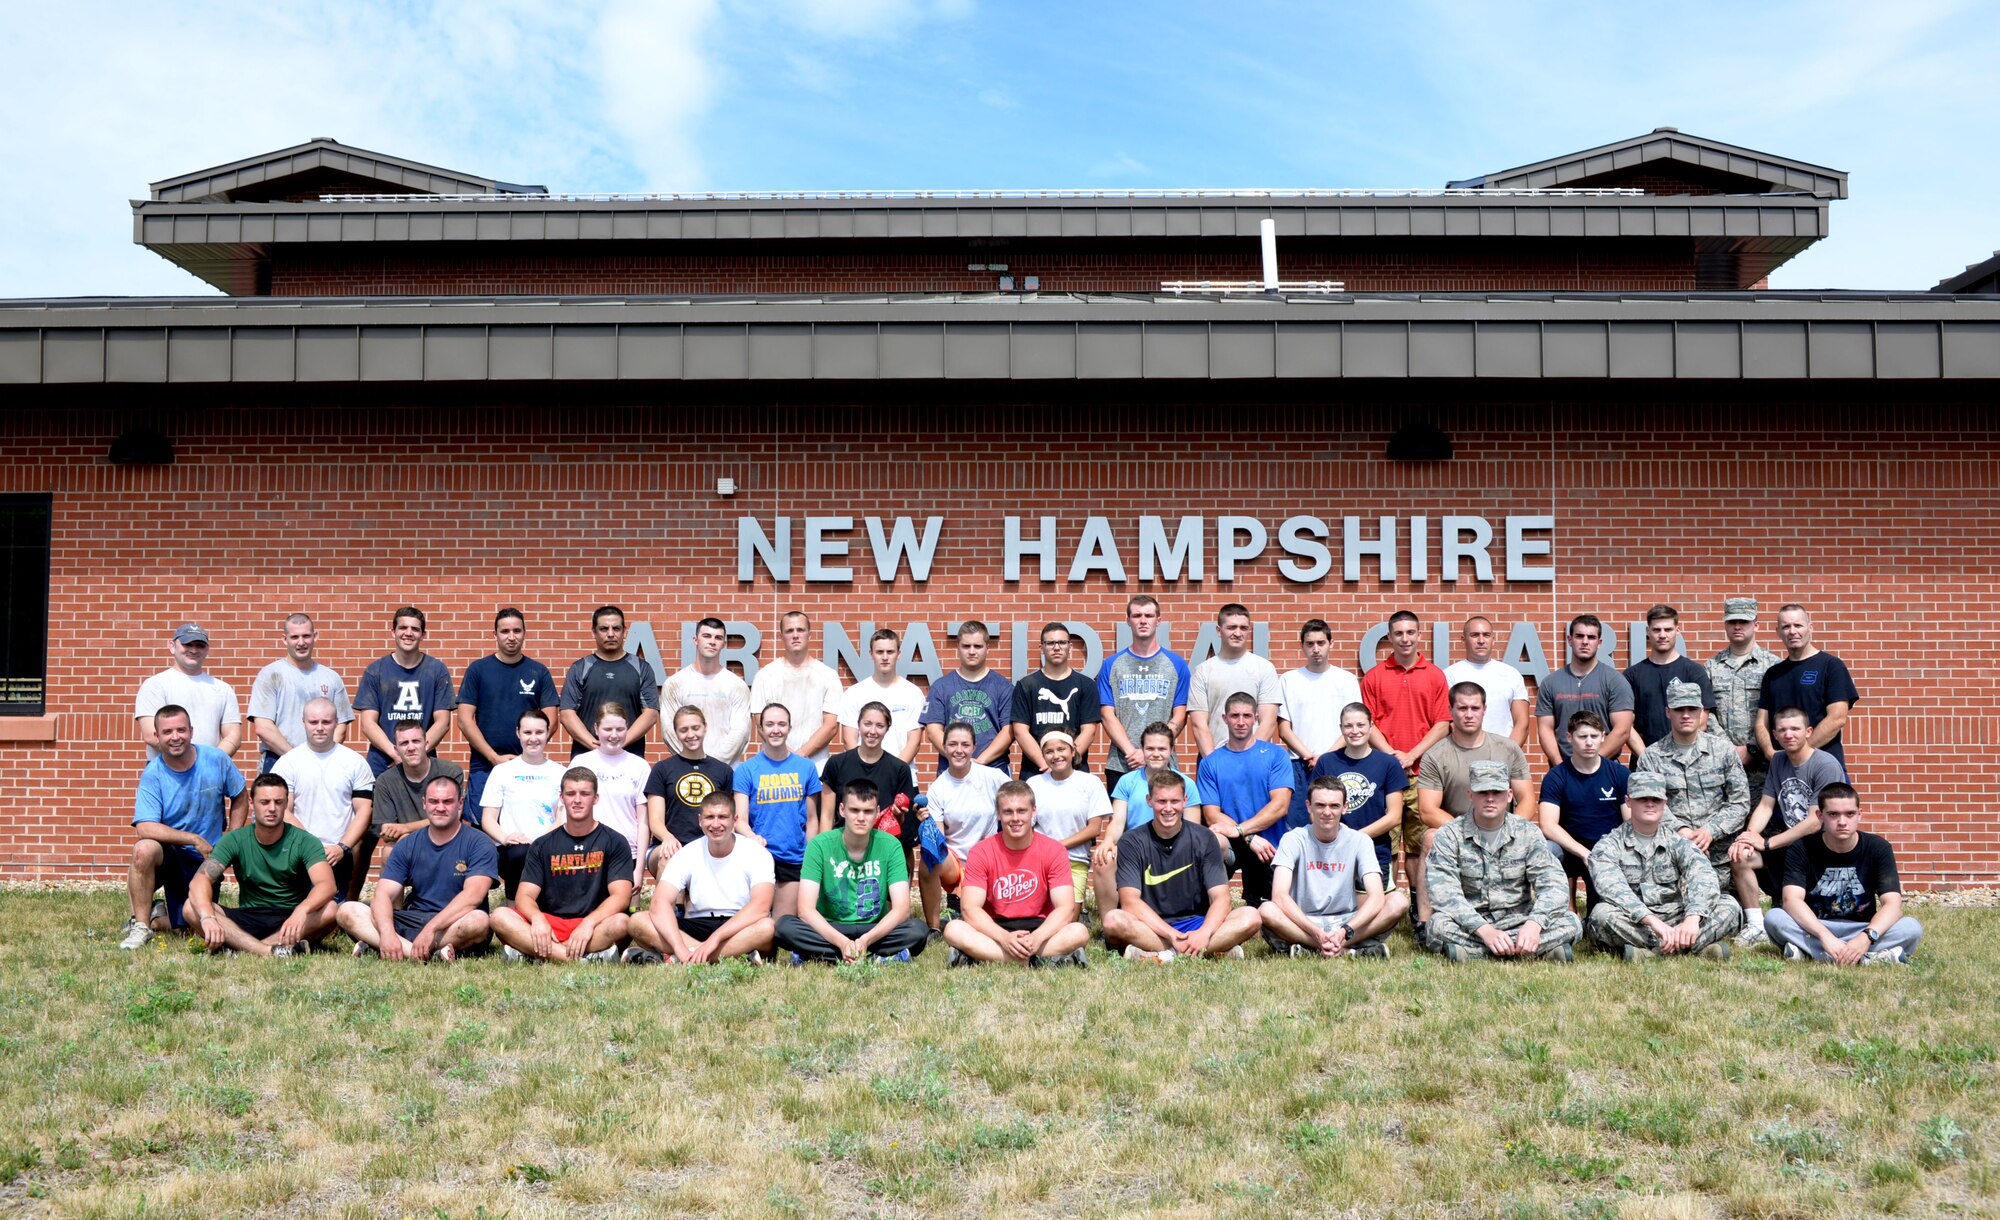 Members of the 157th Air Refueling Wing Student Flight pose for a group photo June 14, 2015 at Pease Air National Guard Base, N.H. Student Flight prepares new members of the New Hampshire Air National Guard for basic training and technical school. (N.H. Air National Guard photo by Airman Ashlyn J. Correia/ RELEASED)
